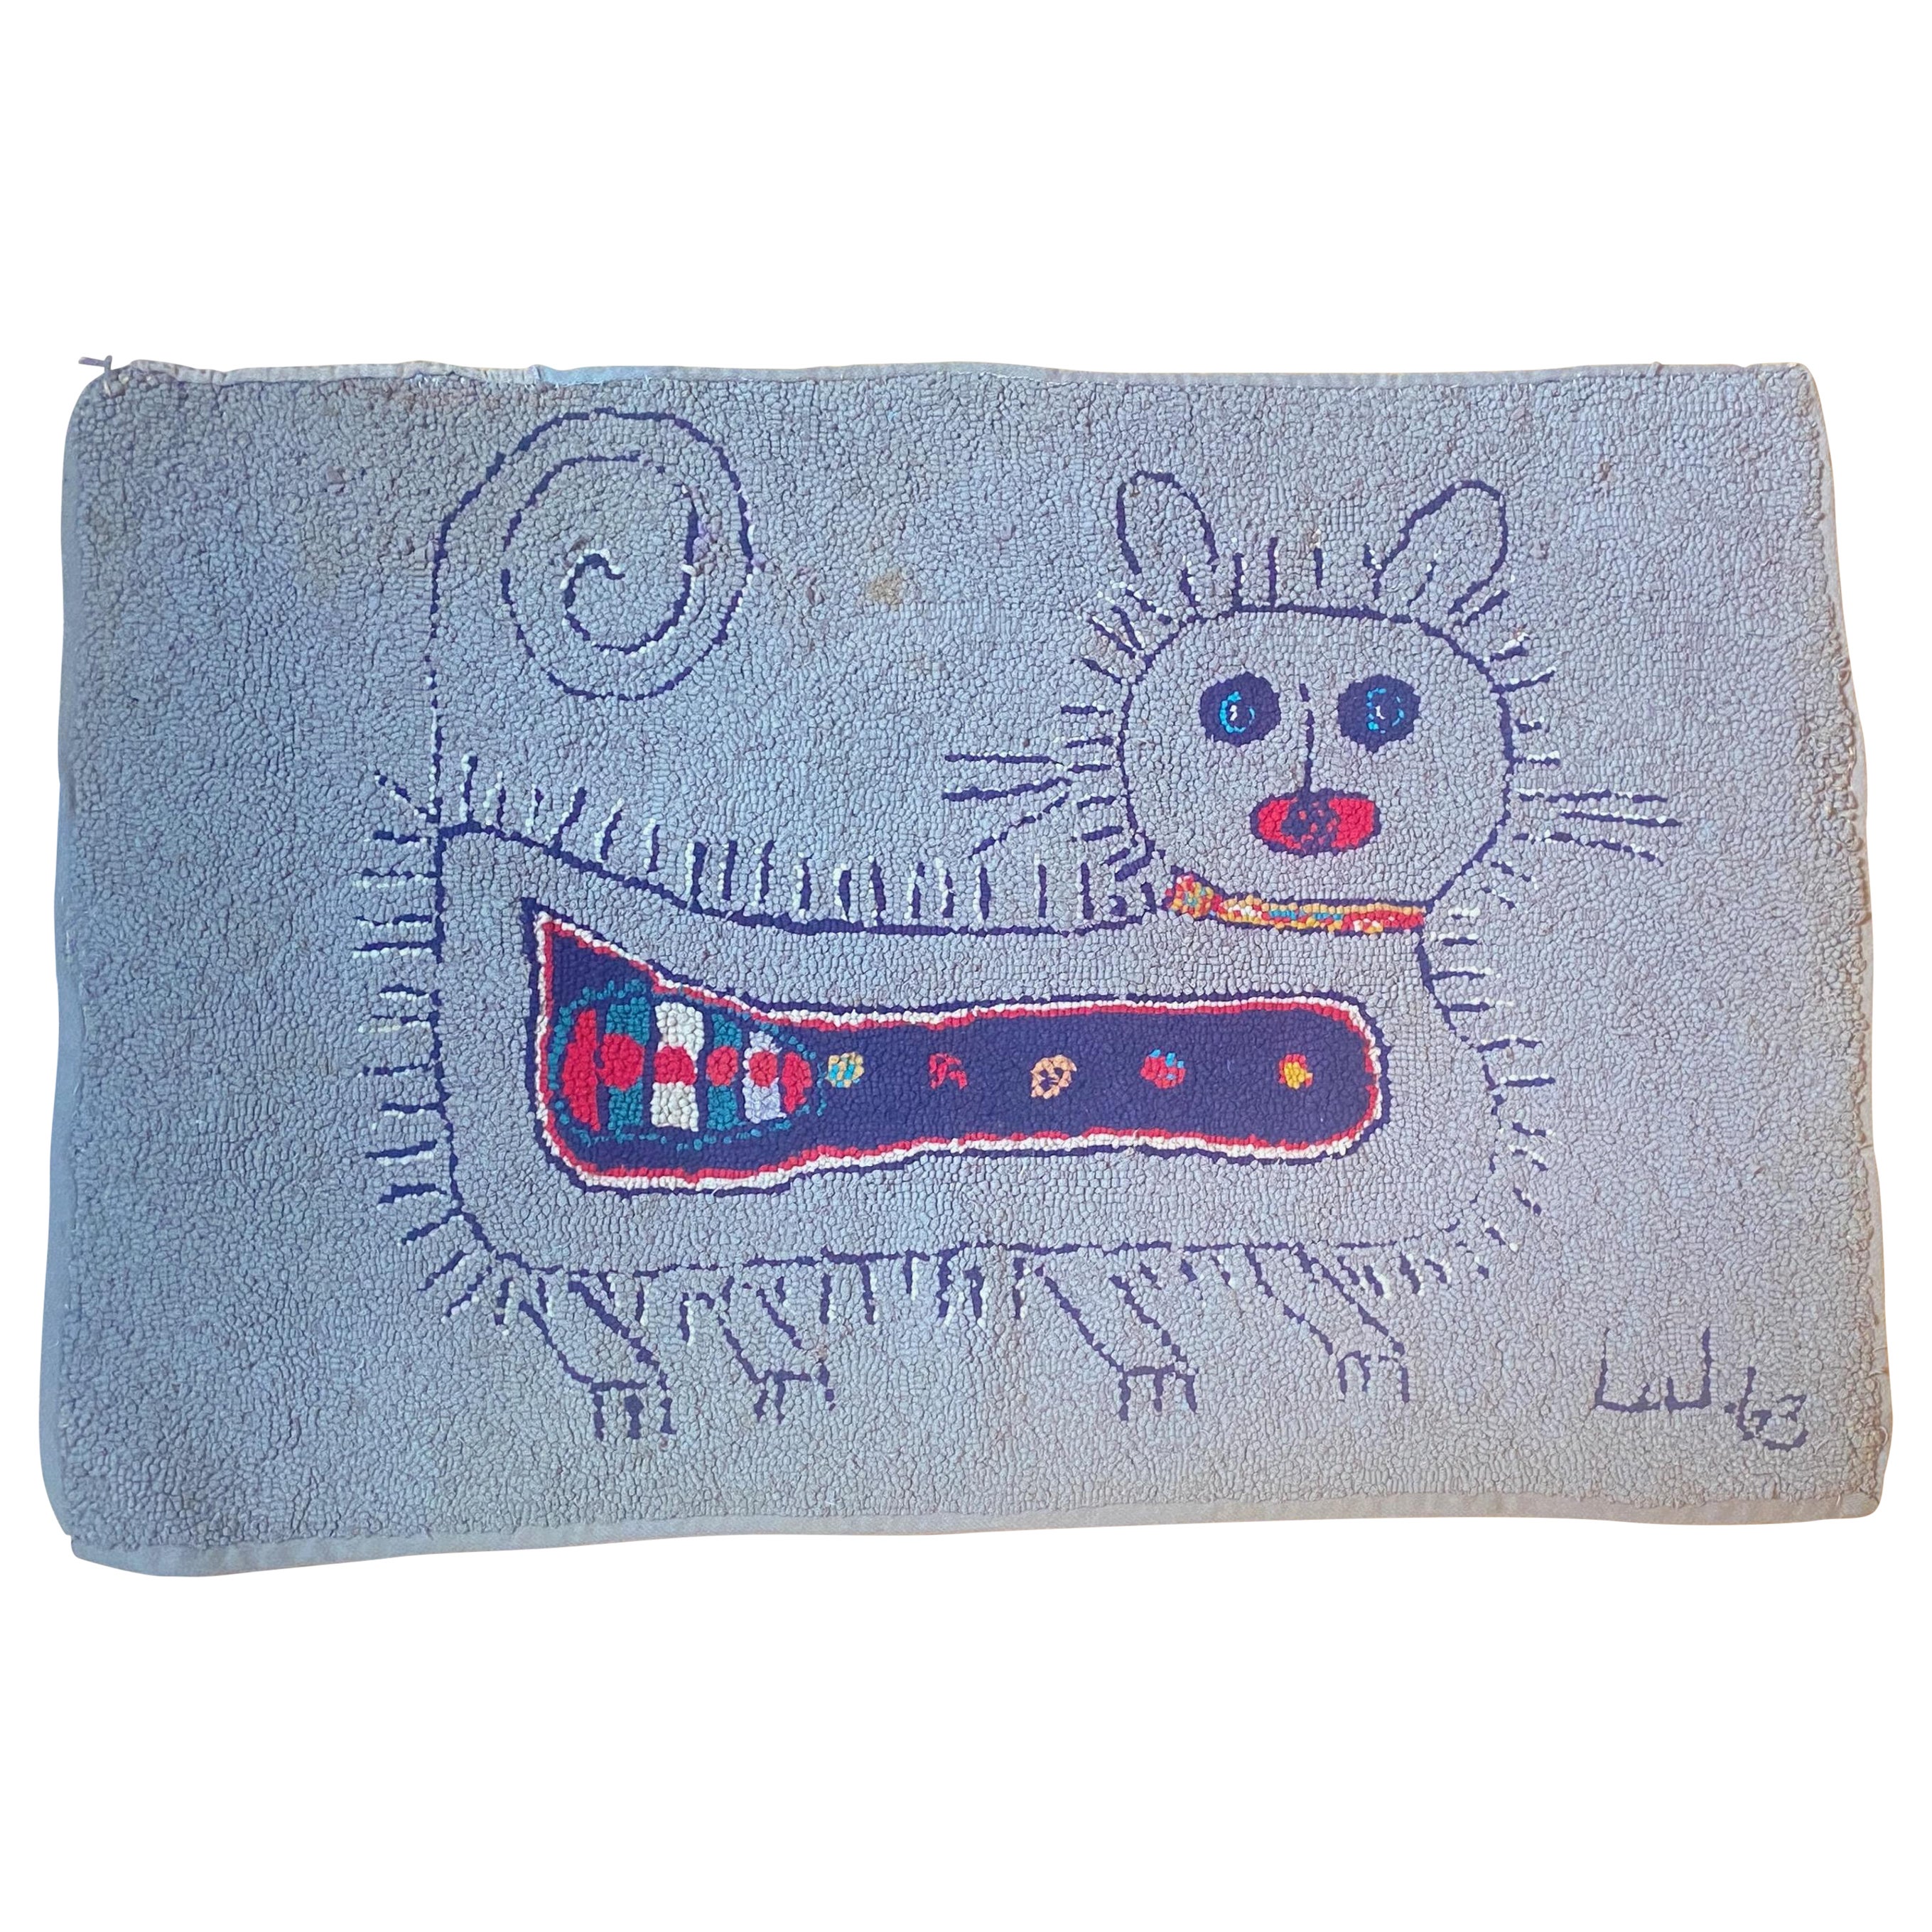 Modernist Mid Century American Folk Art Hooked Rug of a Cat dated 1963 For Sale